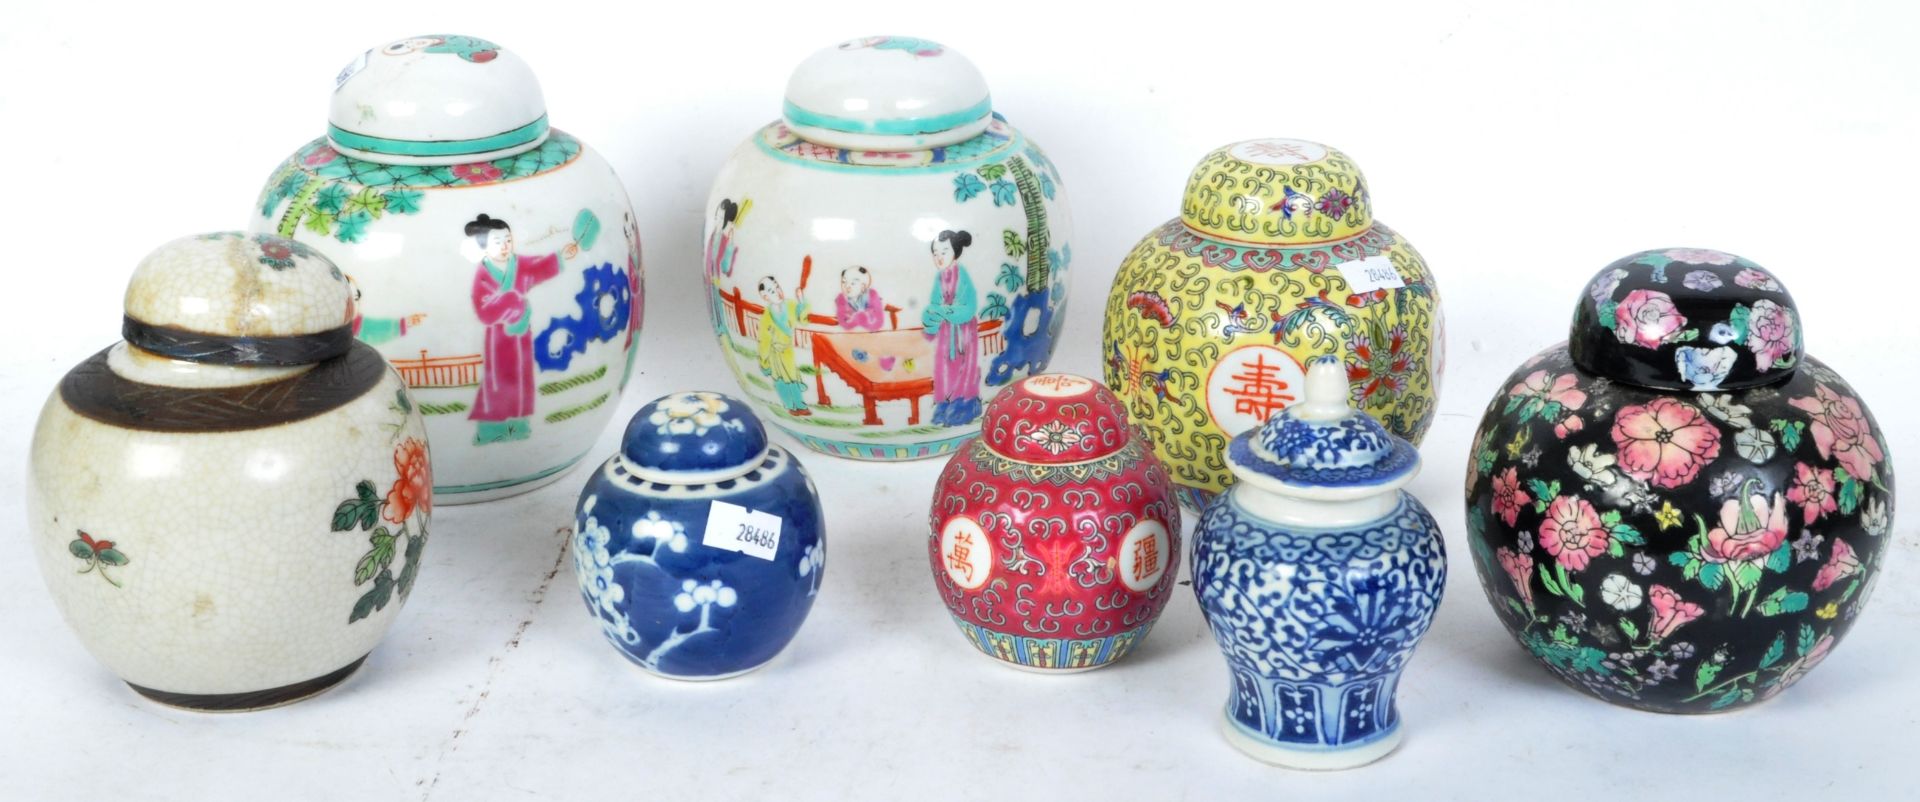 A COLLECTION OF 20TH CENTURY GINGER JARS